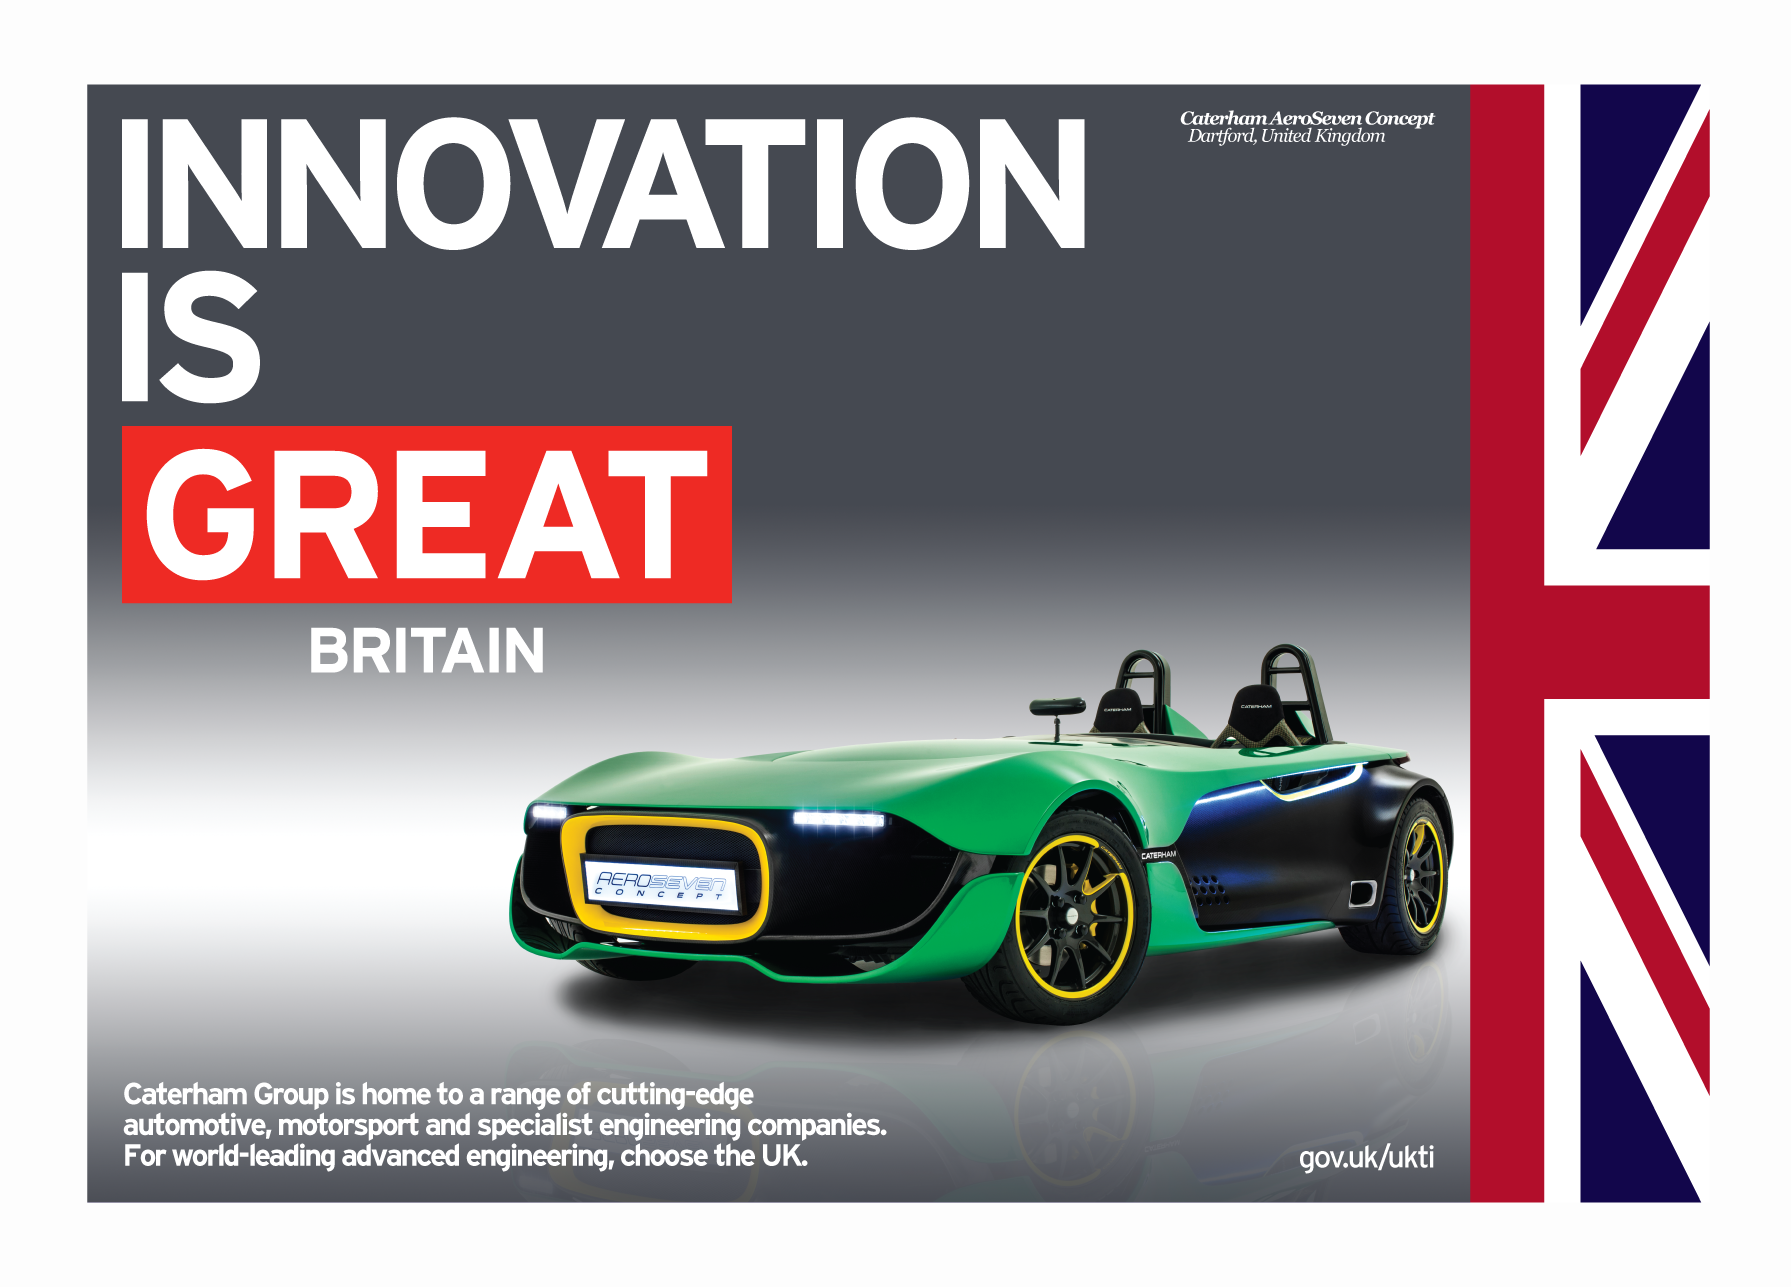 "Innovation is GREAT Regional Automotive and Aerospace